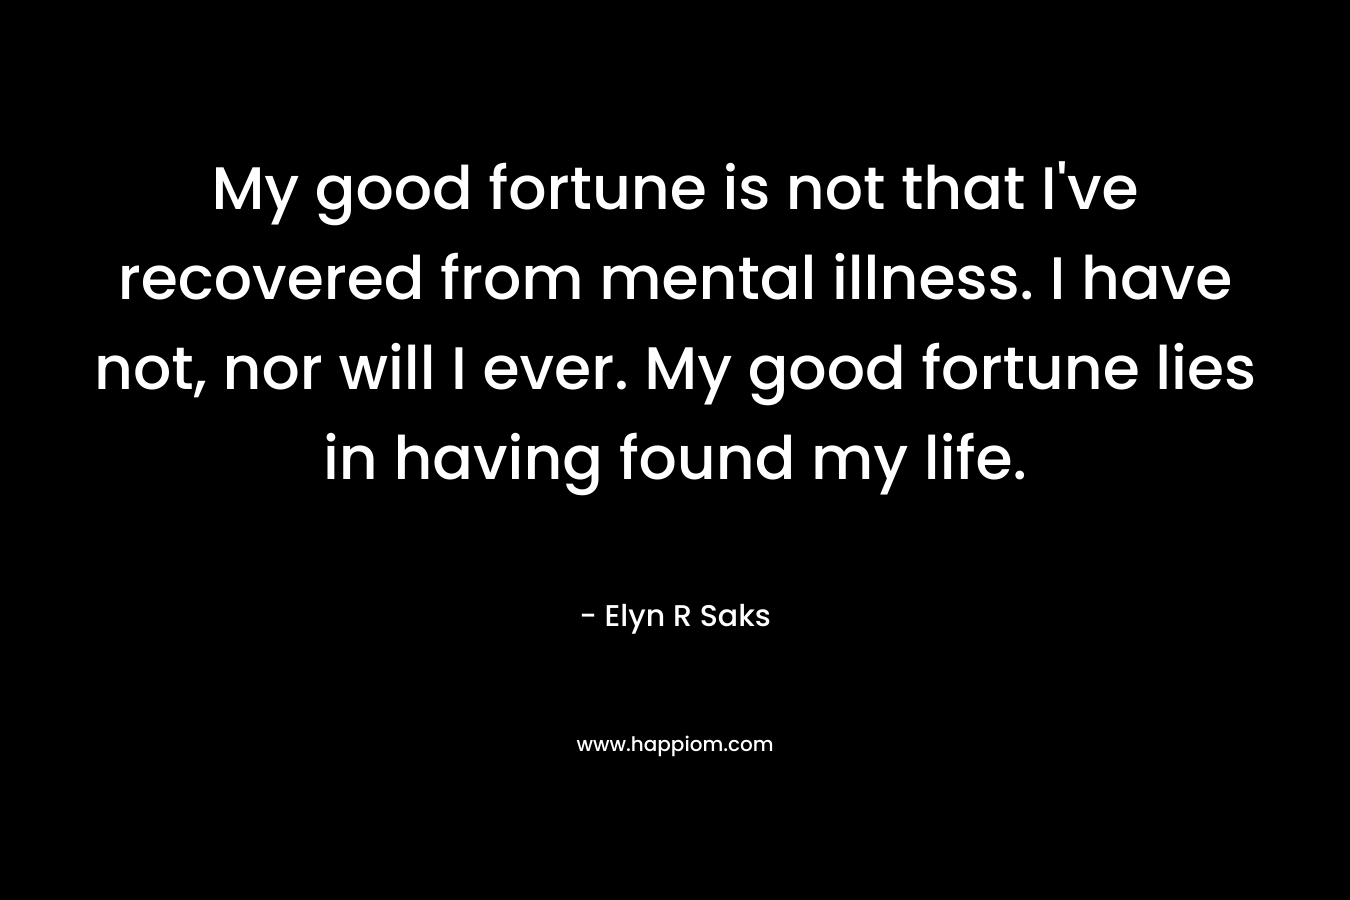 My good fortune is not that I've recovered from mental illness. I have not, nor will I ever. My good fortune lies in having found my life.